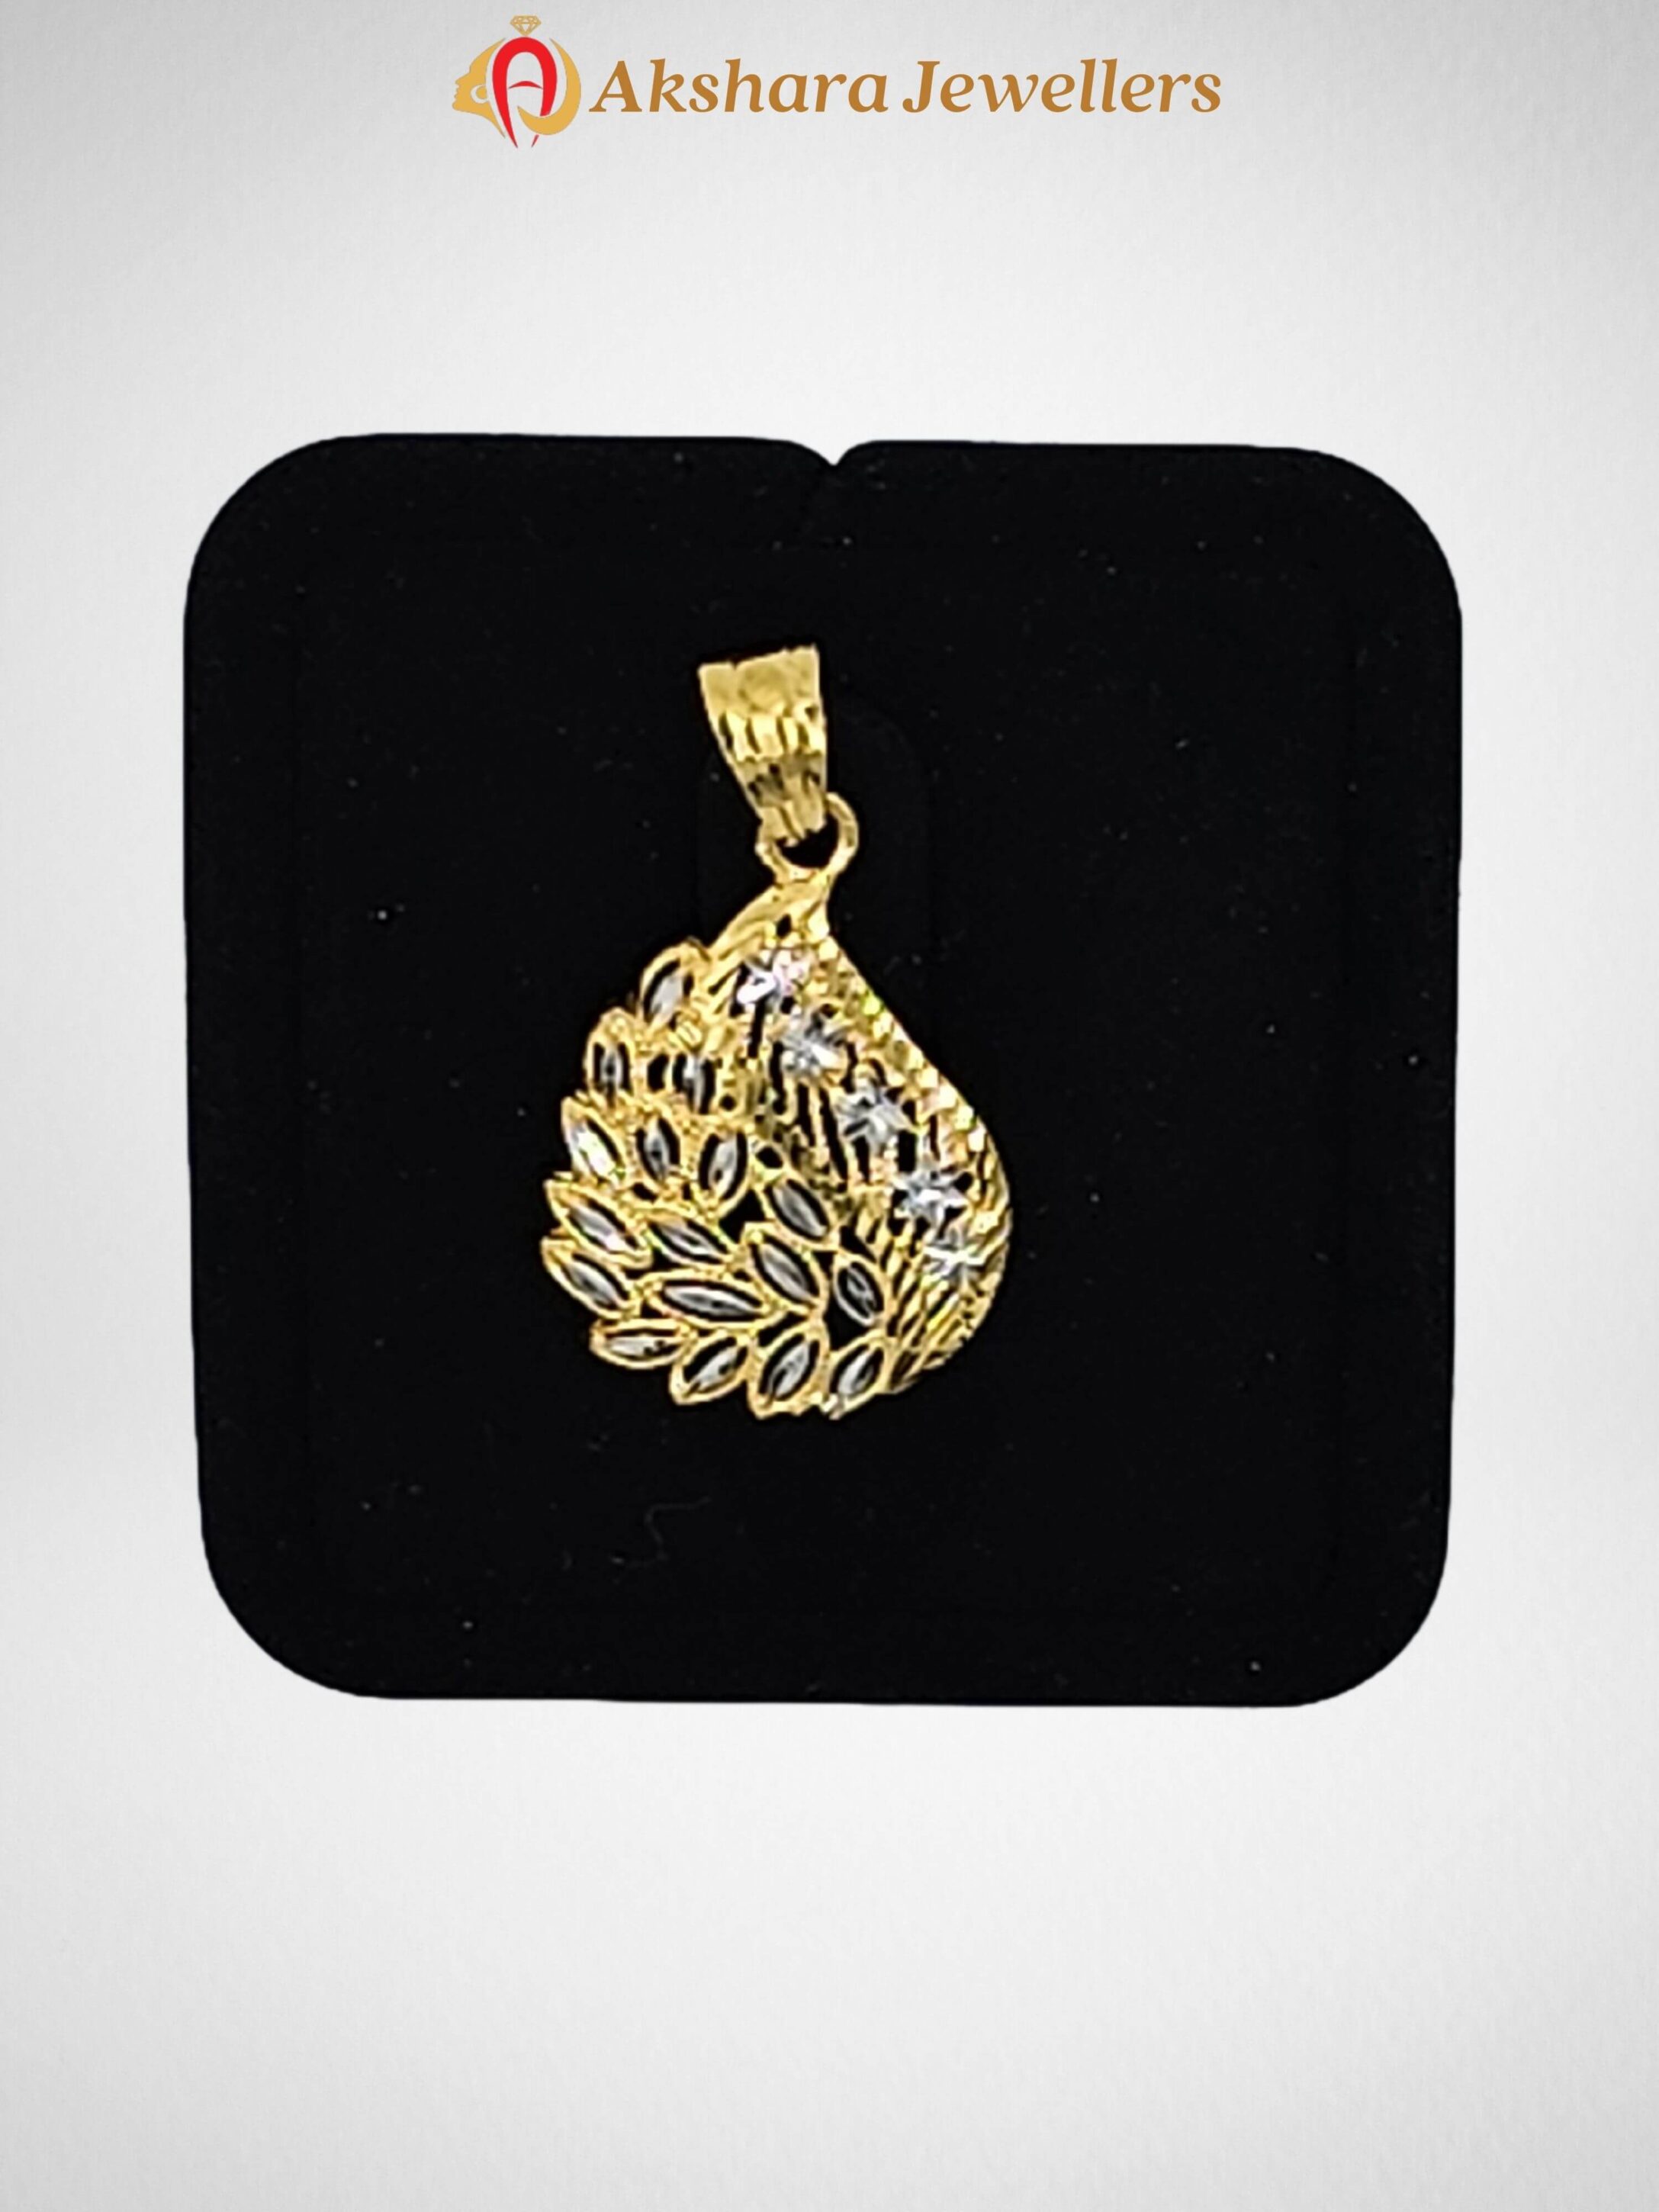 Pendant Collections, Gold Pendant Collections, Akshara Jewellers Pendant Collections, Akshara Jewellers, Sydney Akshara Jewellers